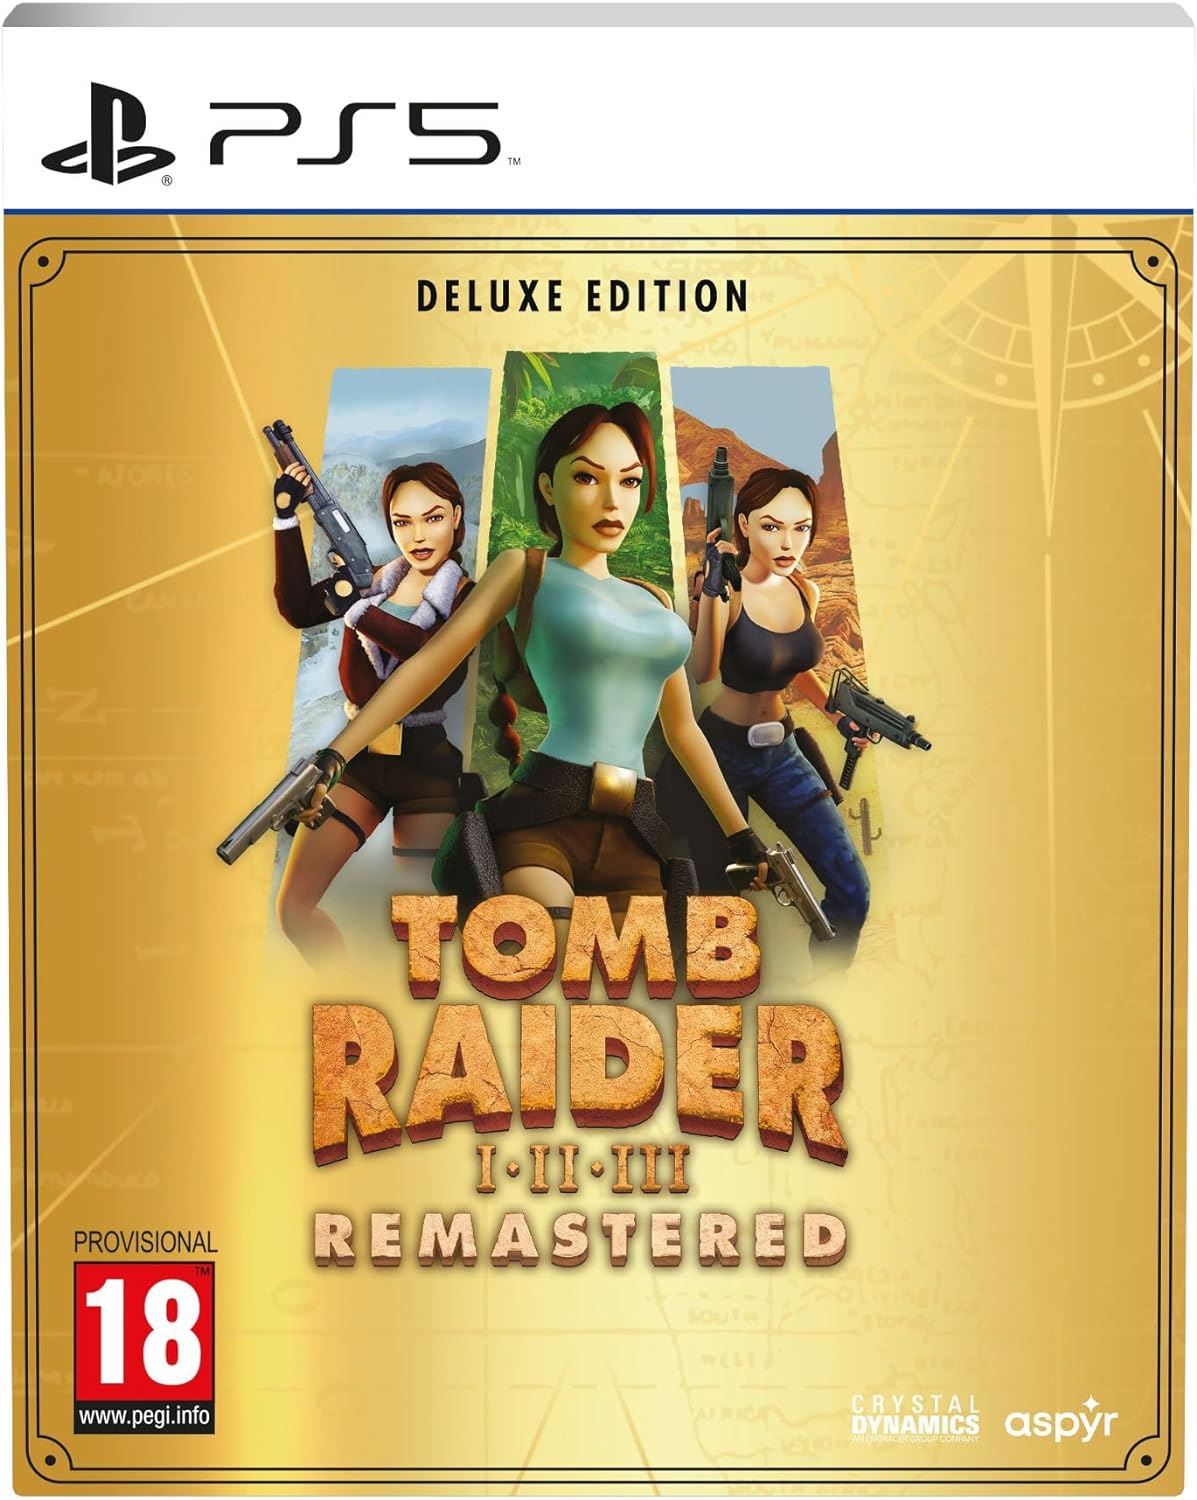 Tomb Raider 1-3 Remastered Starring Lara Croft: Deluxe Edition PS5 Game